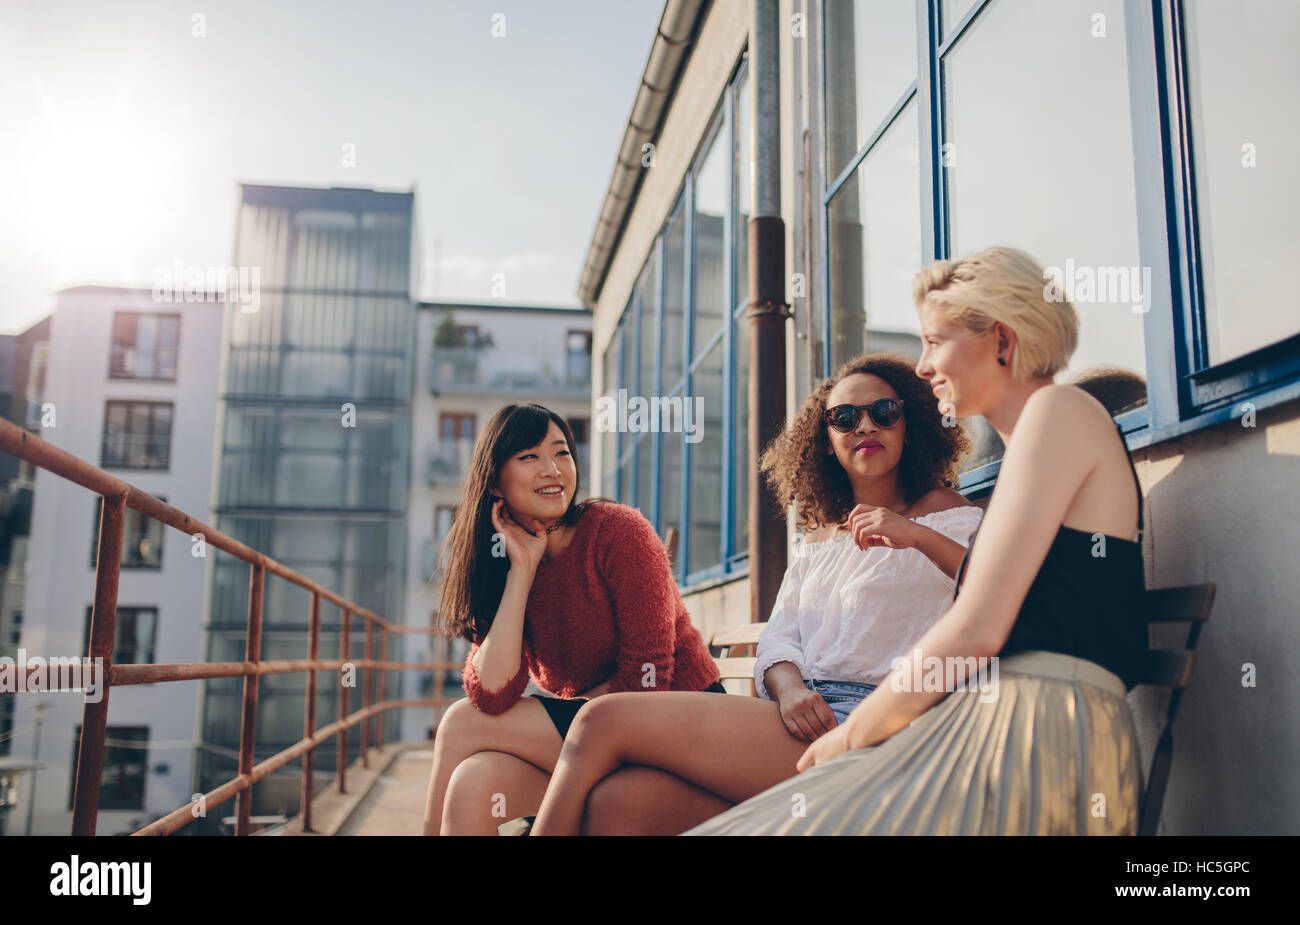 Three young female friends sitting in balcony. Women relaxing outdoors and chatting. Stock Photo